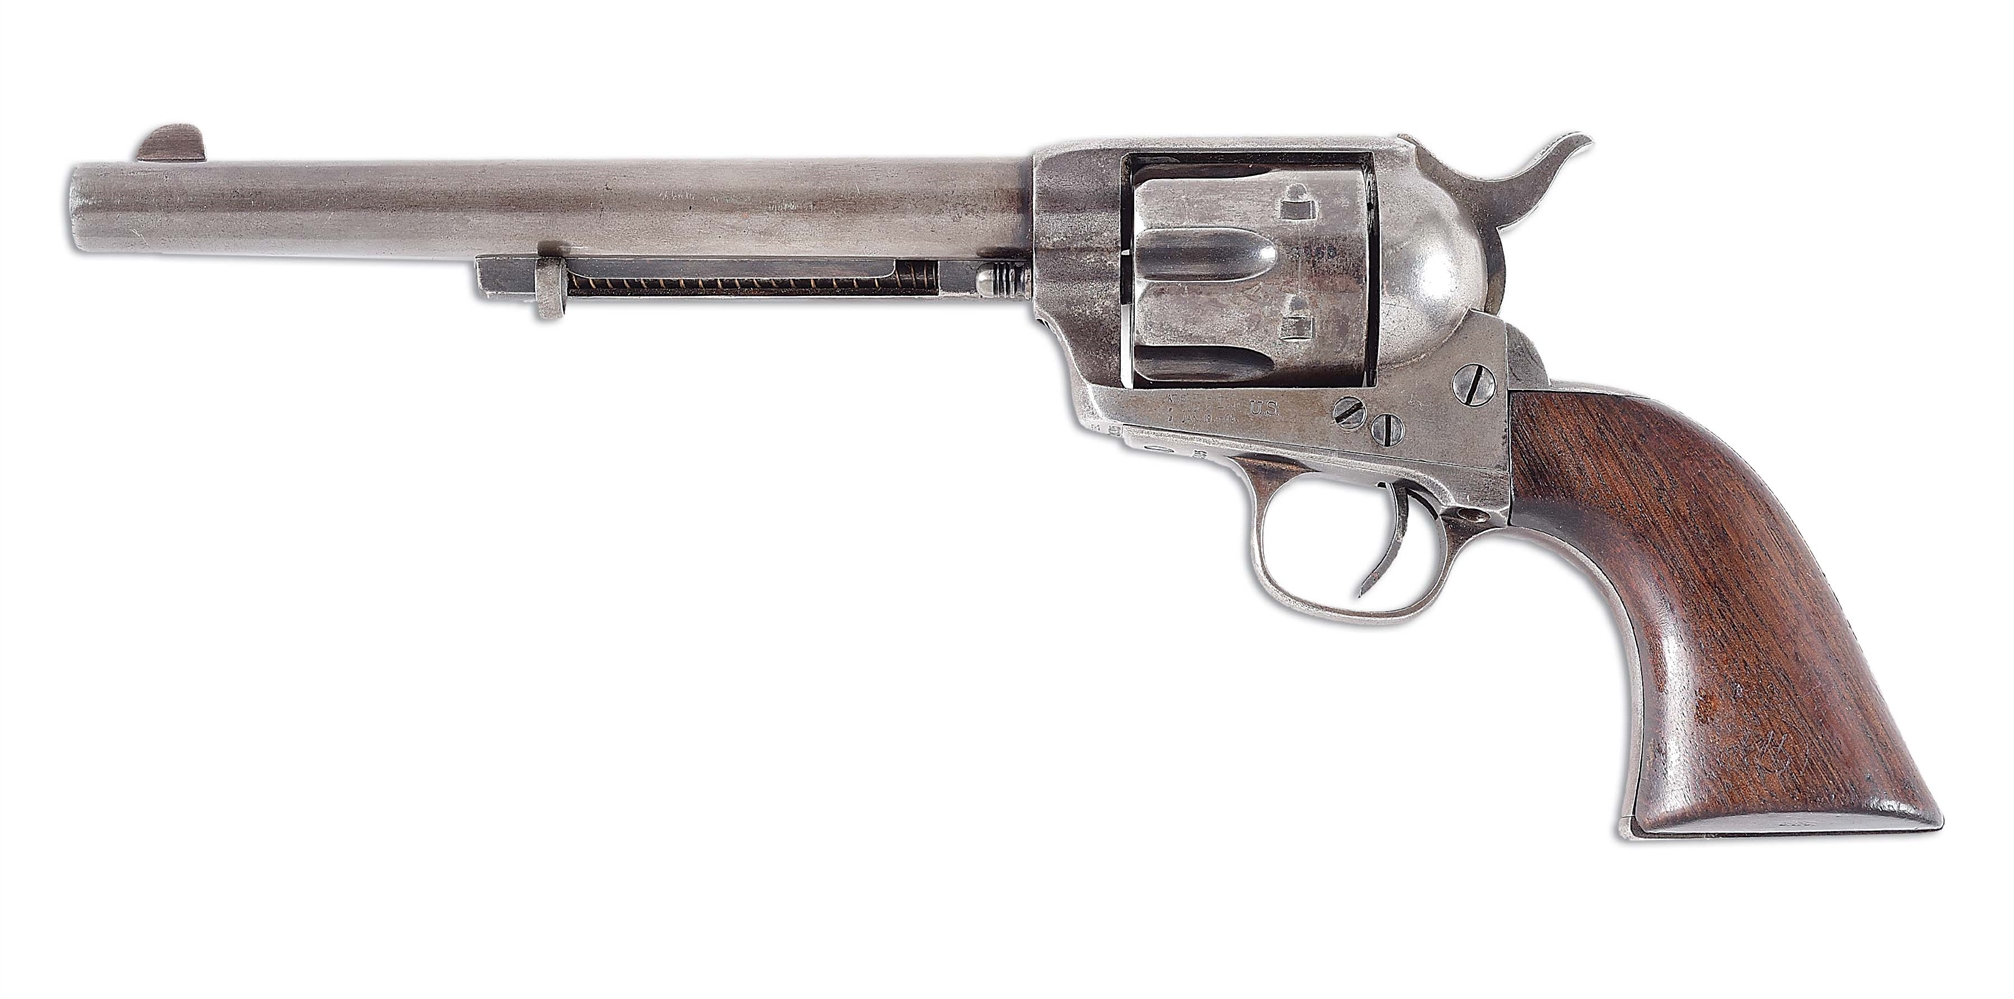 (A) COLT SINGLE ACTION ARMY REVOLVER SHIPPED TO SIMMONS HARDWARE COMPANY IN 1885.